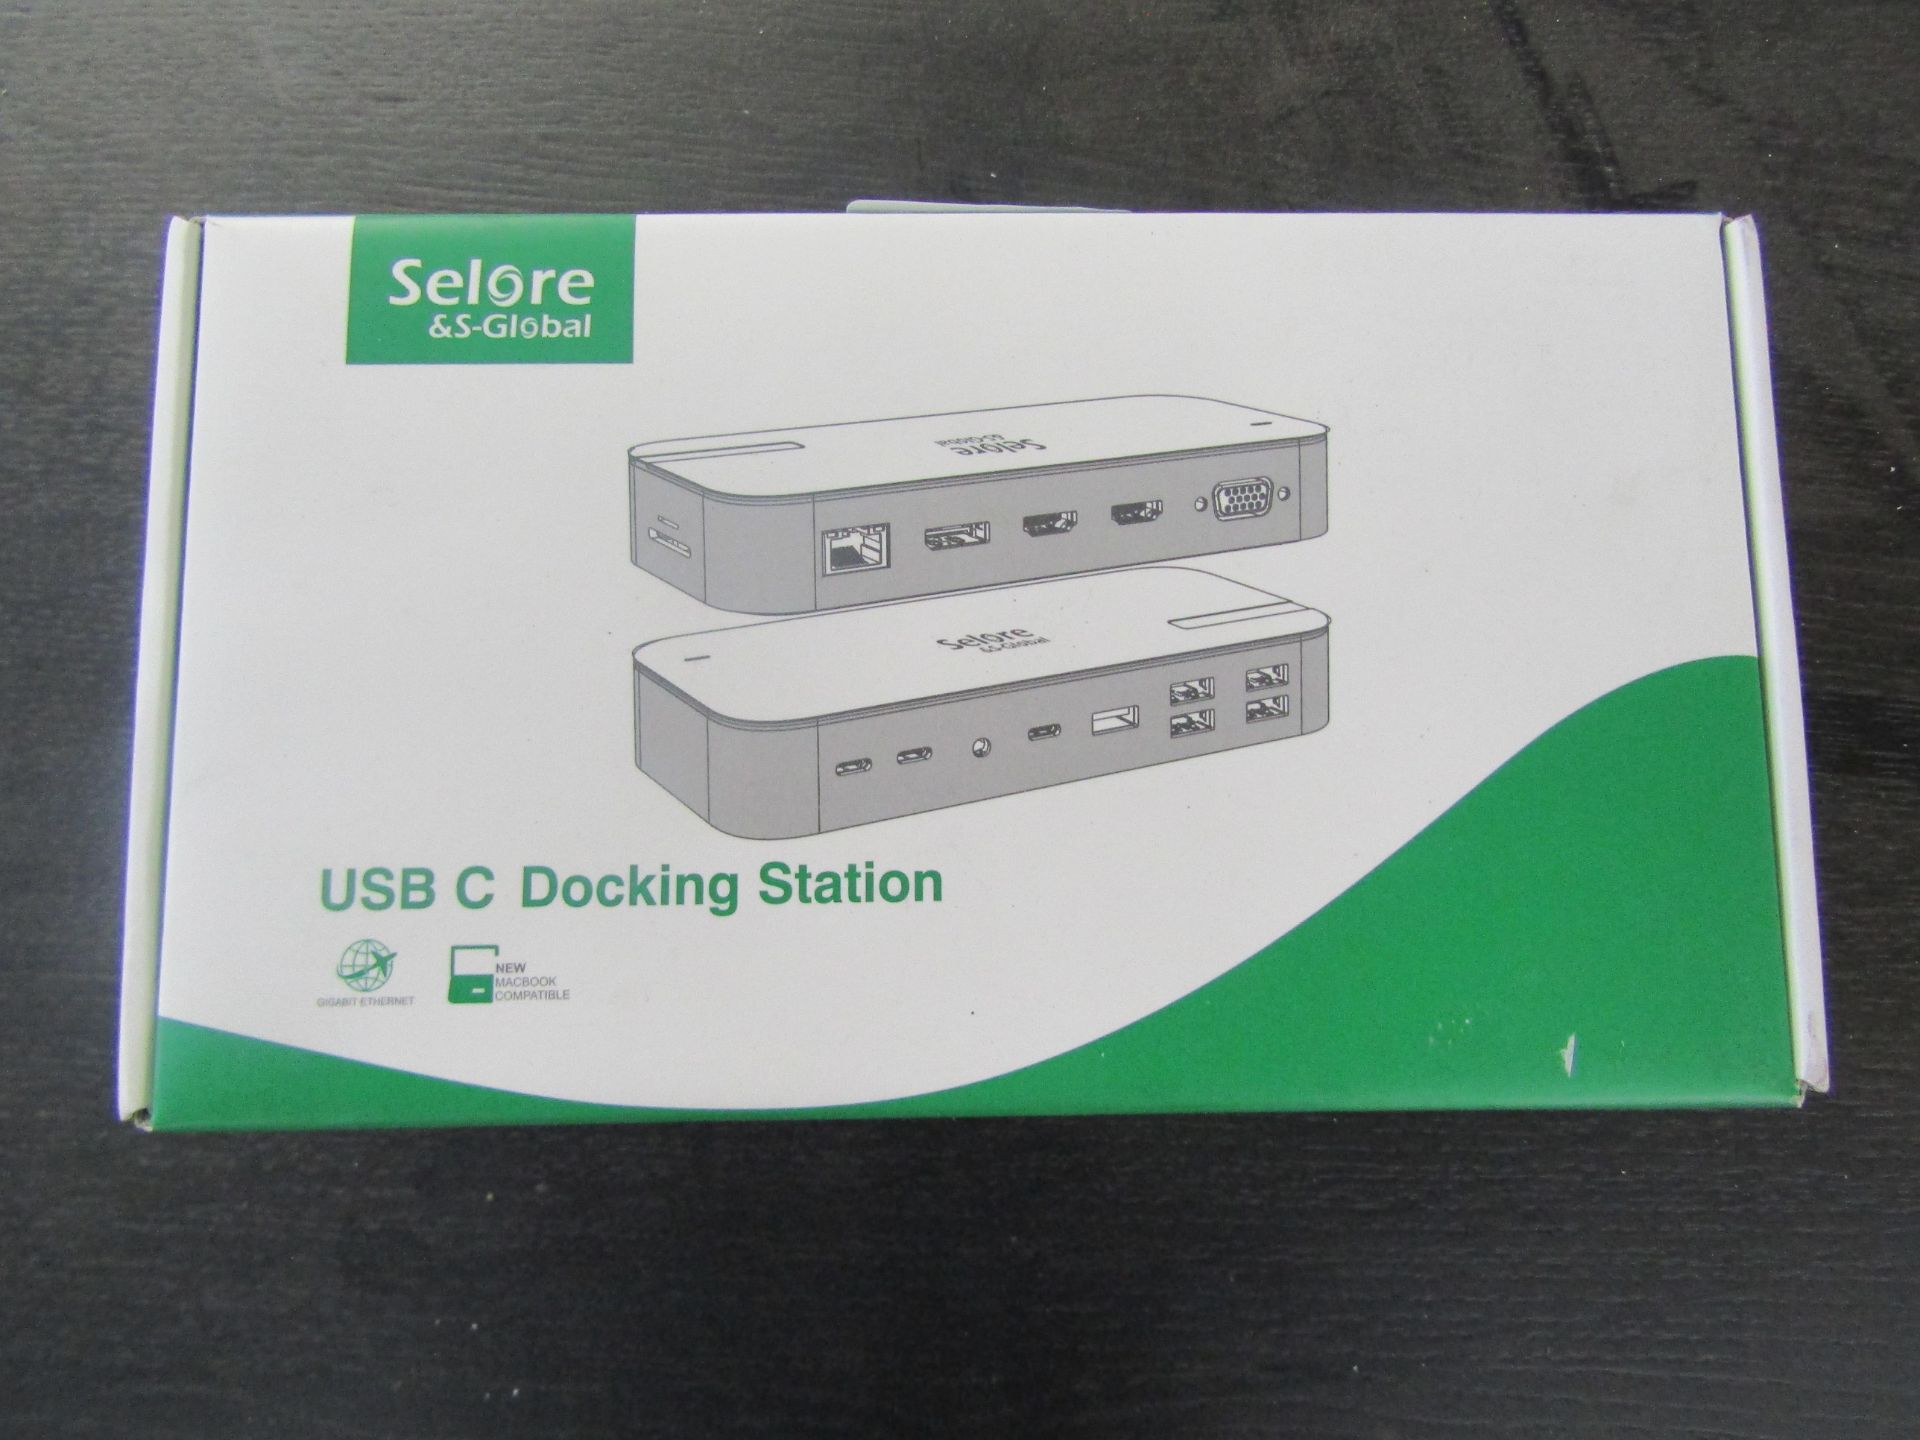 Solore & S-Global Quadruple Display USB-C Docking Station - Appears To Be Unused & Boxed - RRP CIRCA